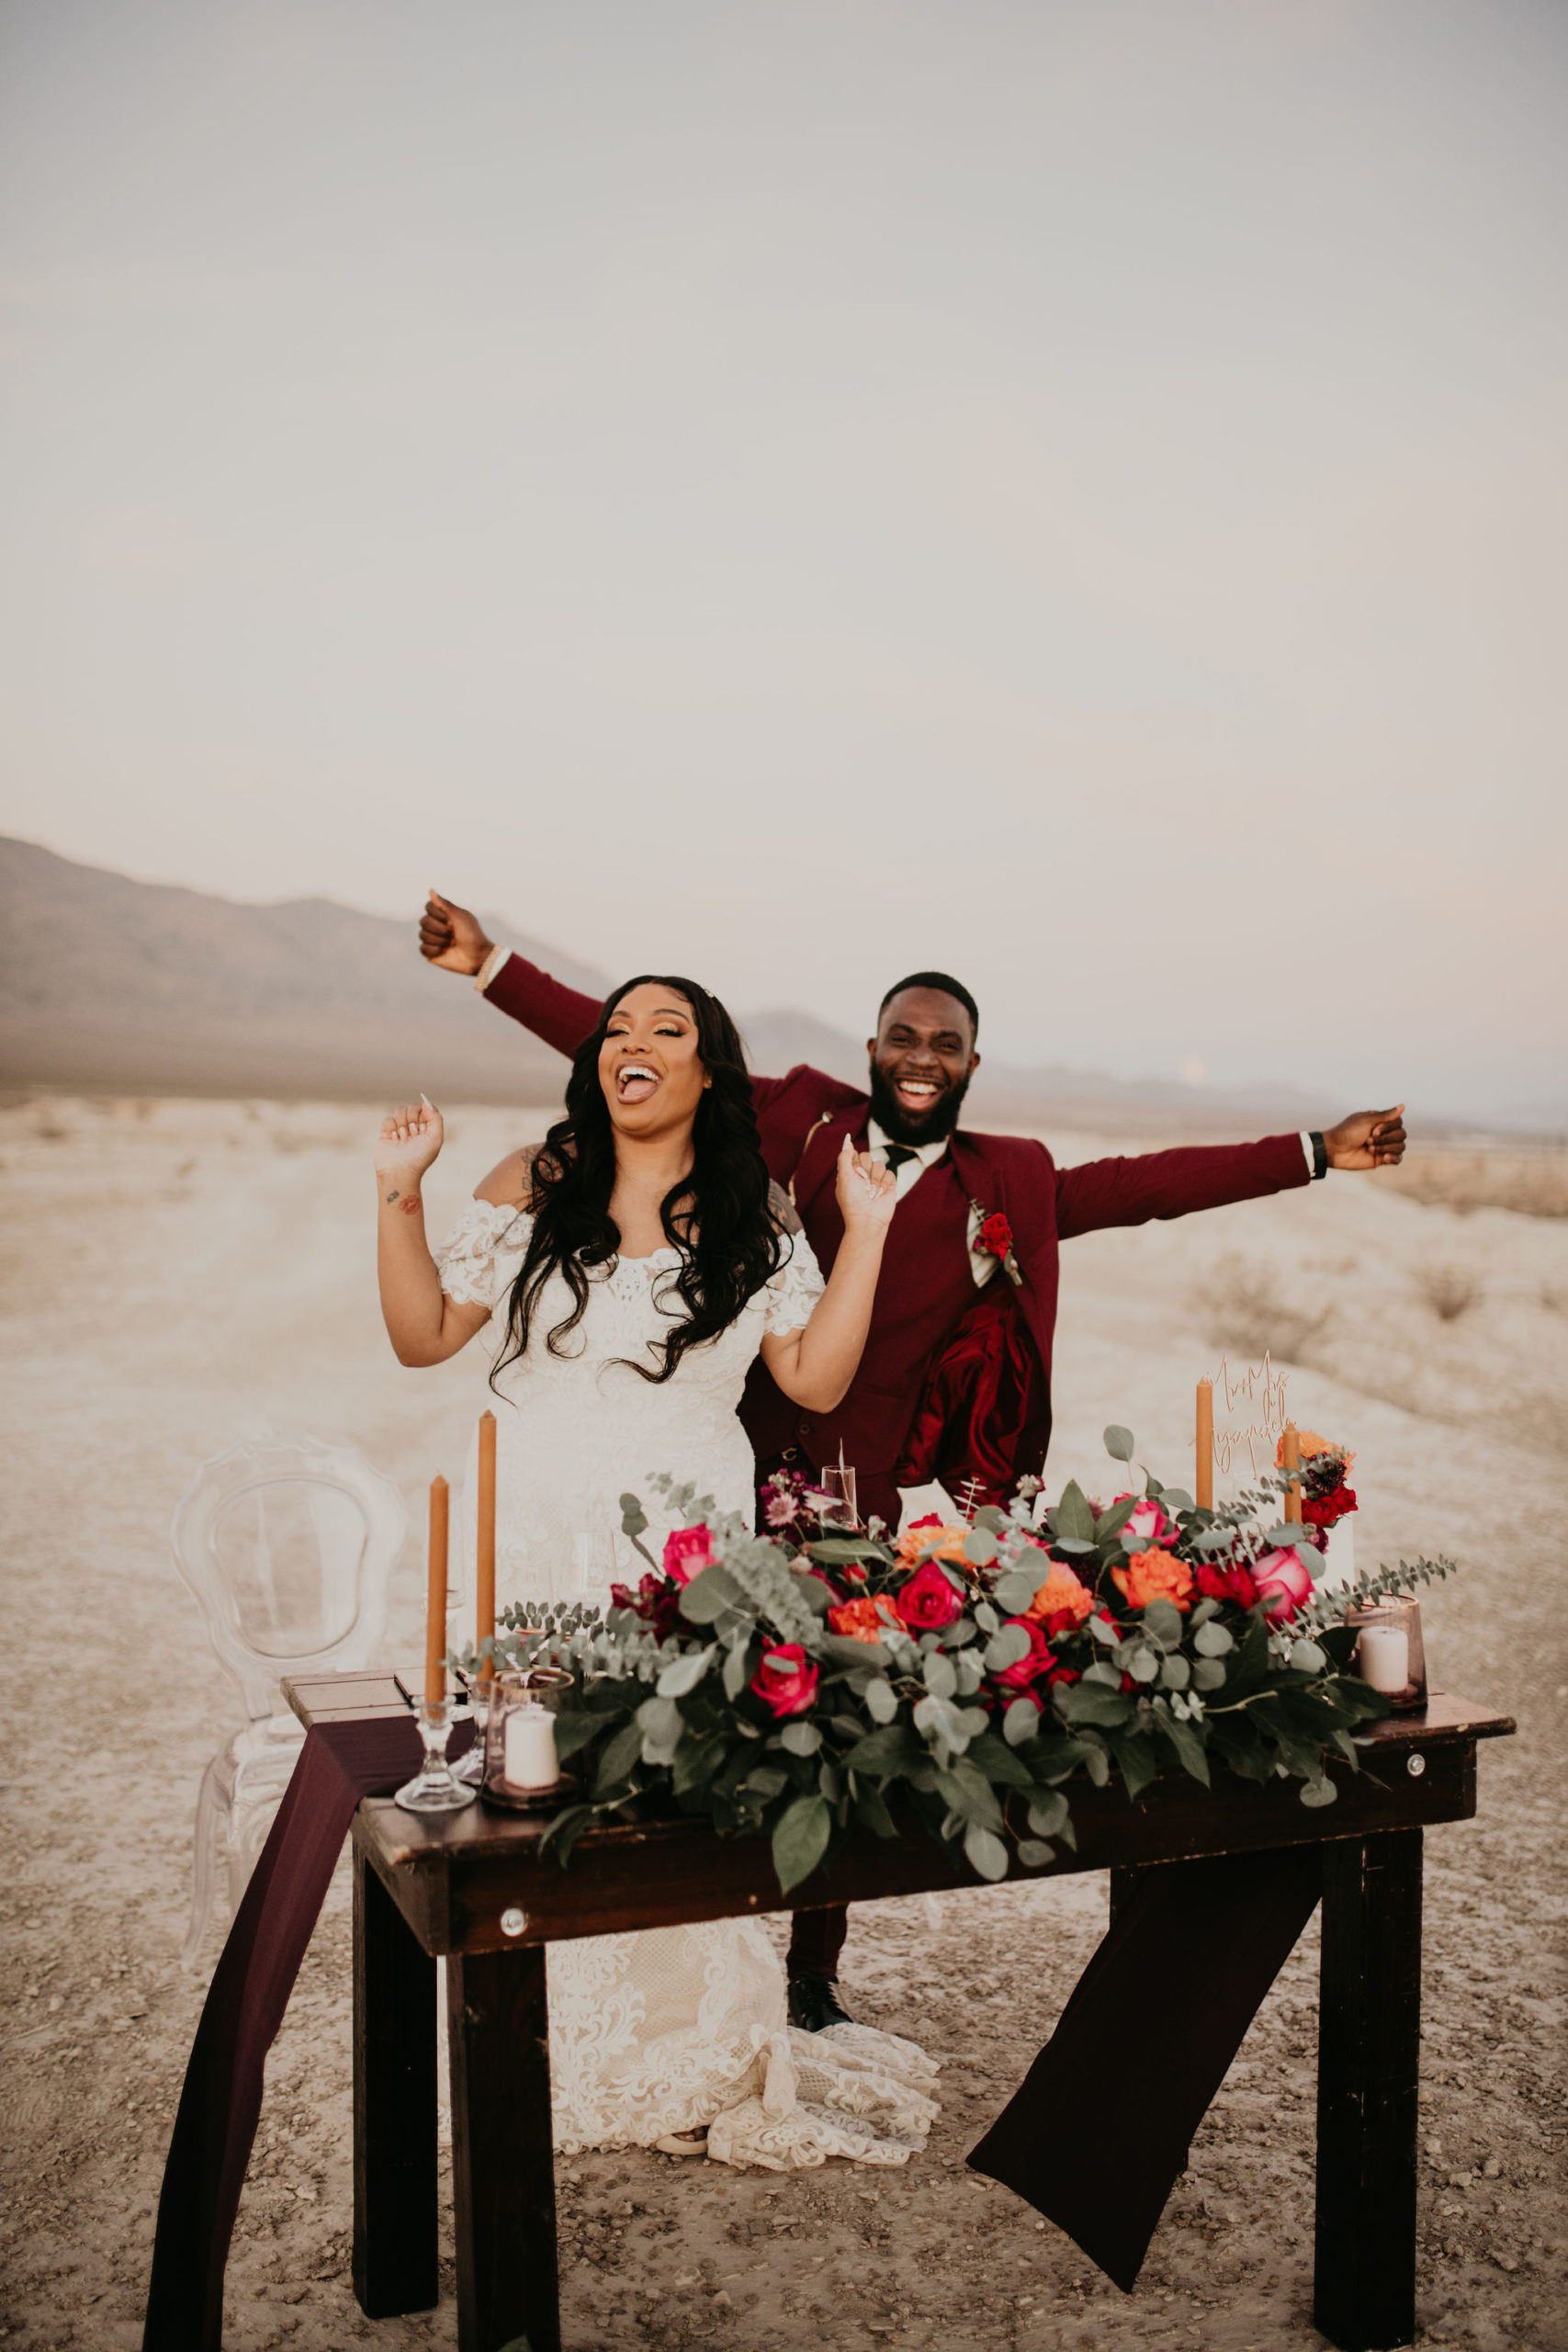 Newlyweds Happy after Eloping Just the Two of Them in Jewel Tone Las Vegas Elopement